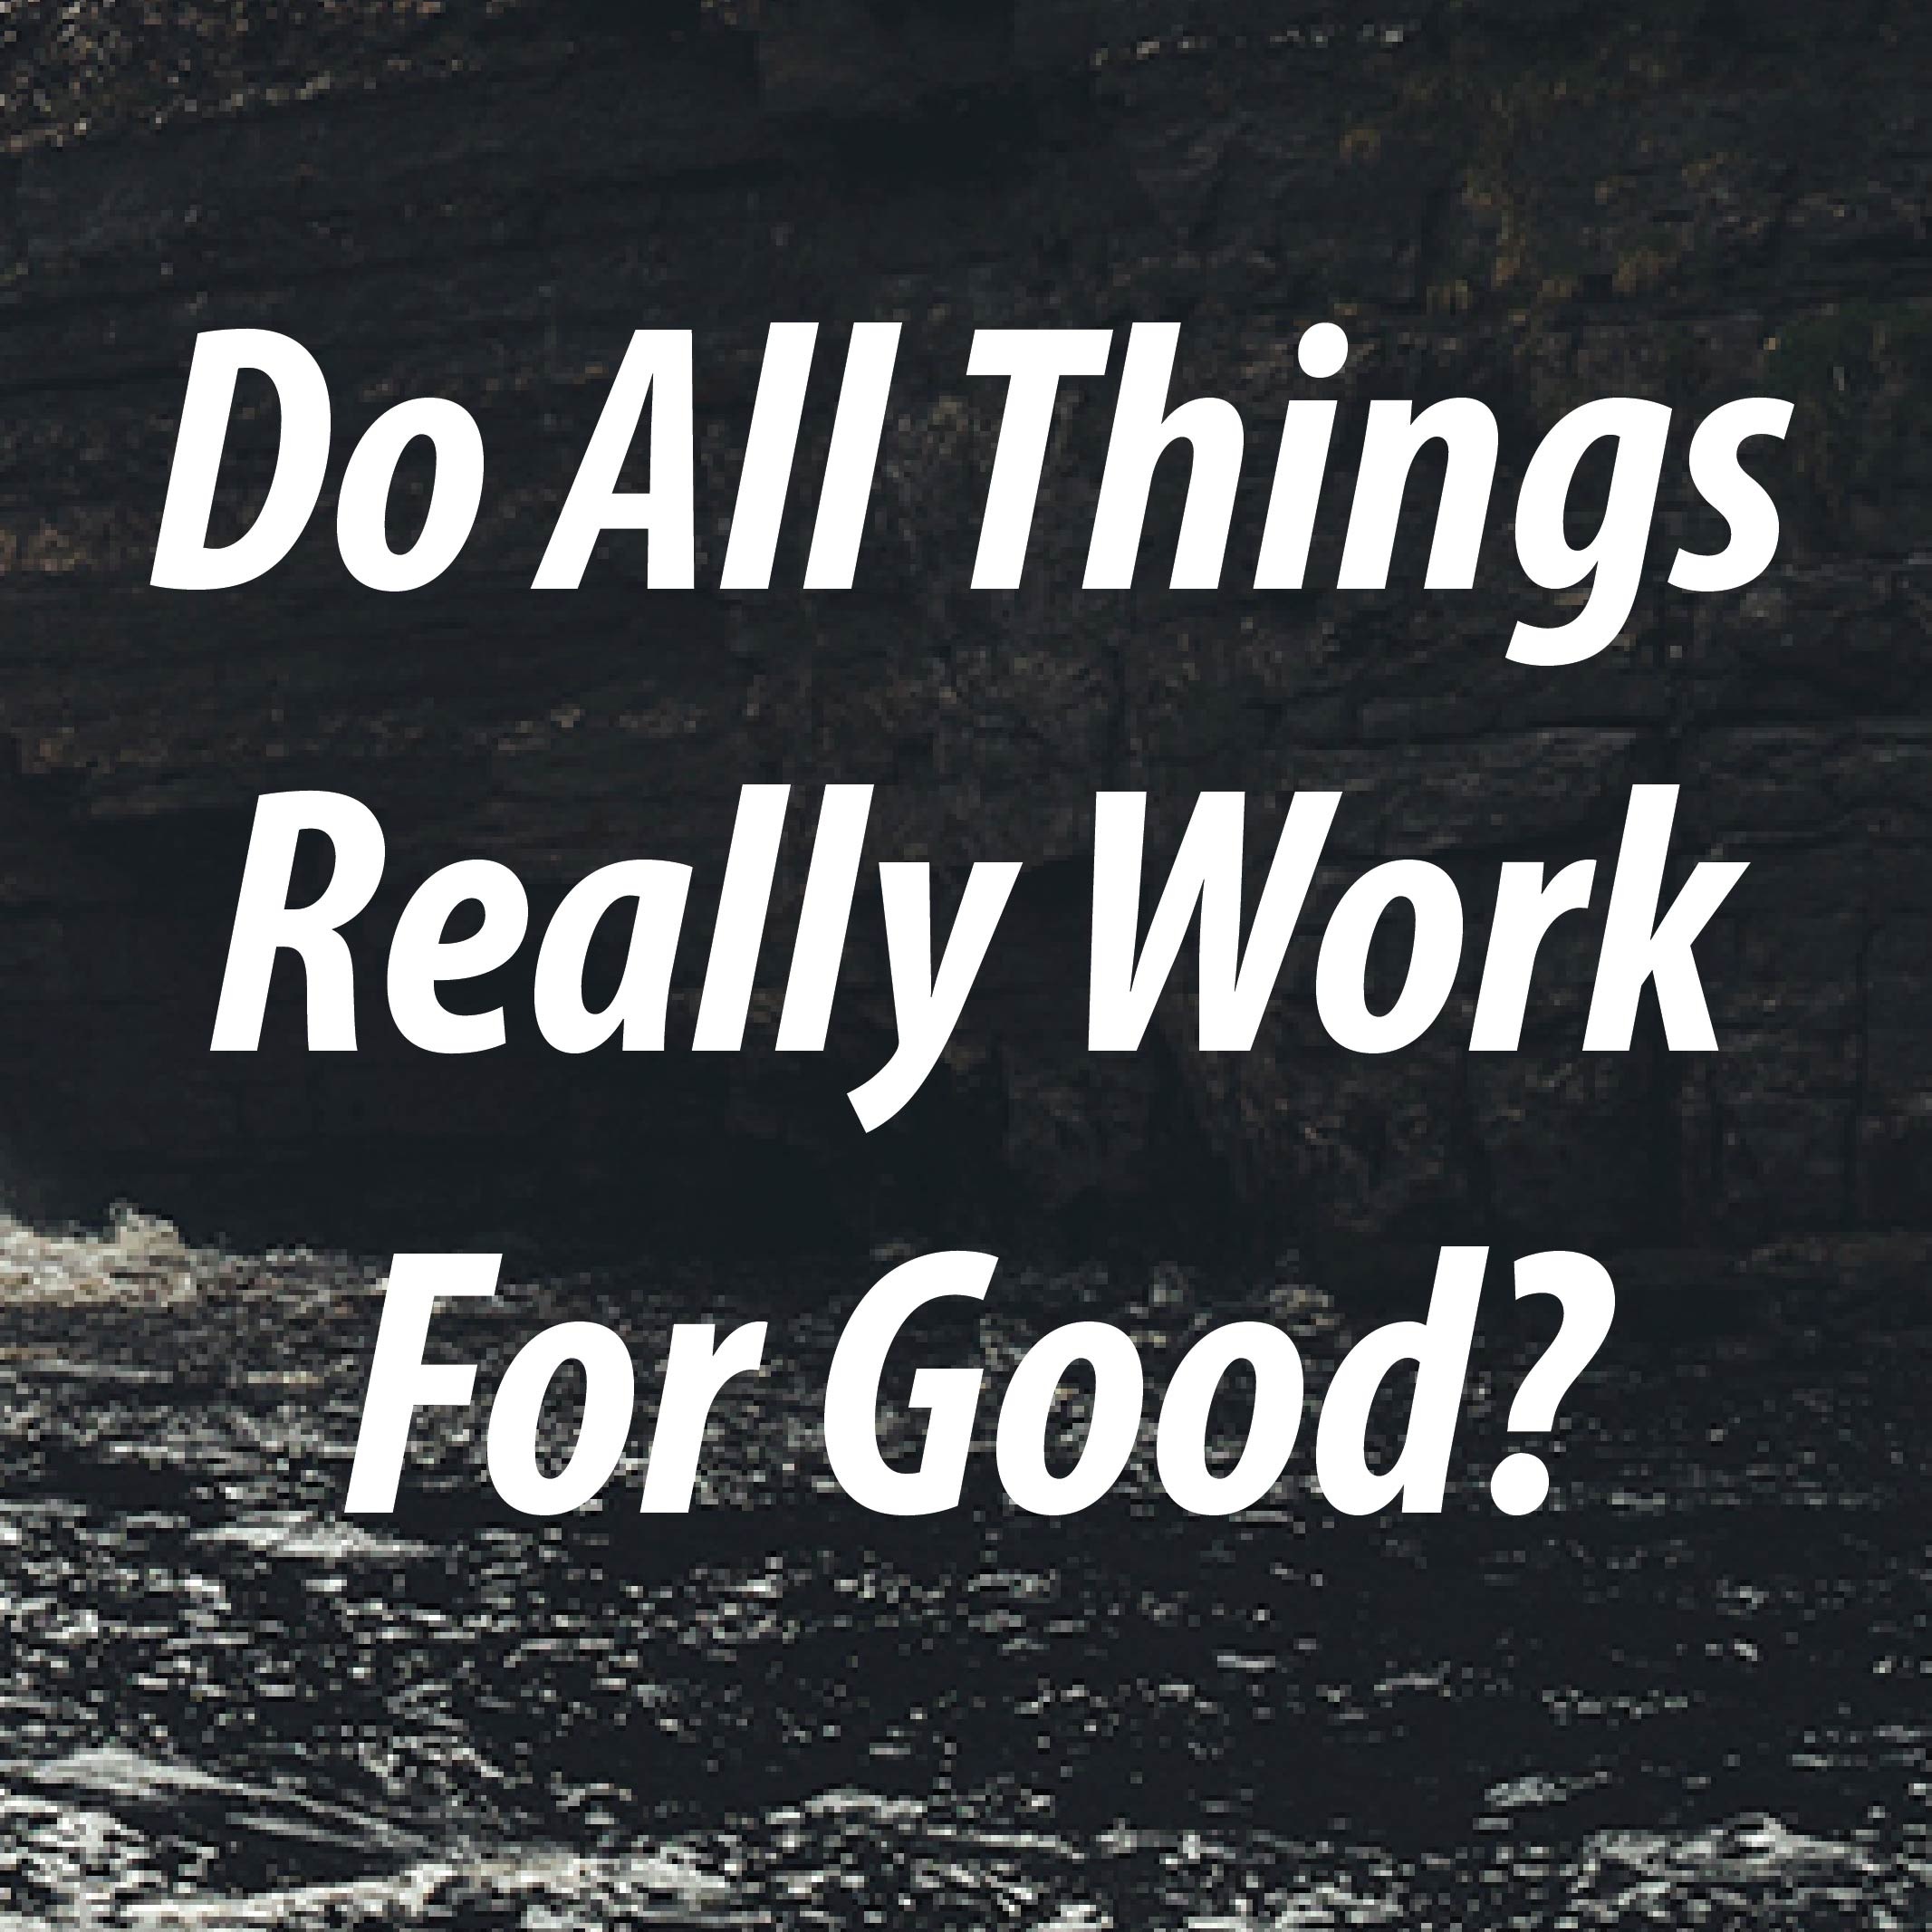 Do All Things Really Work For Good?